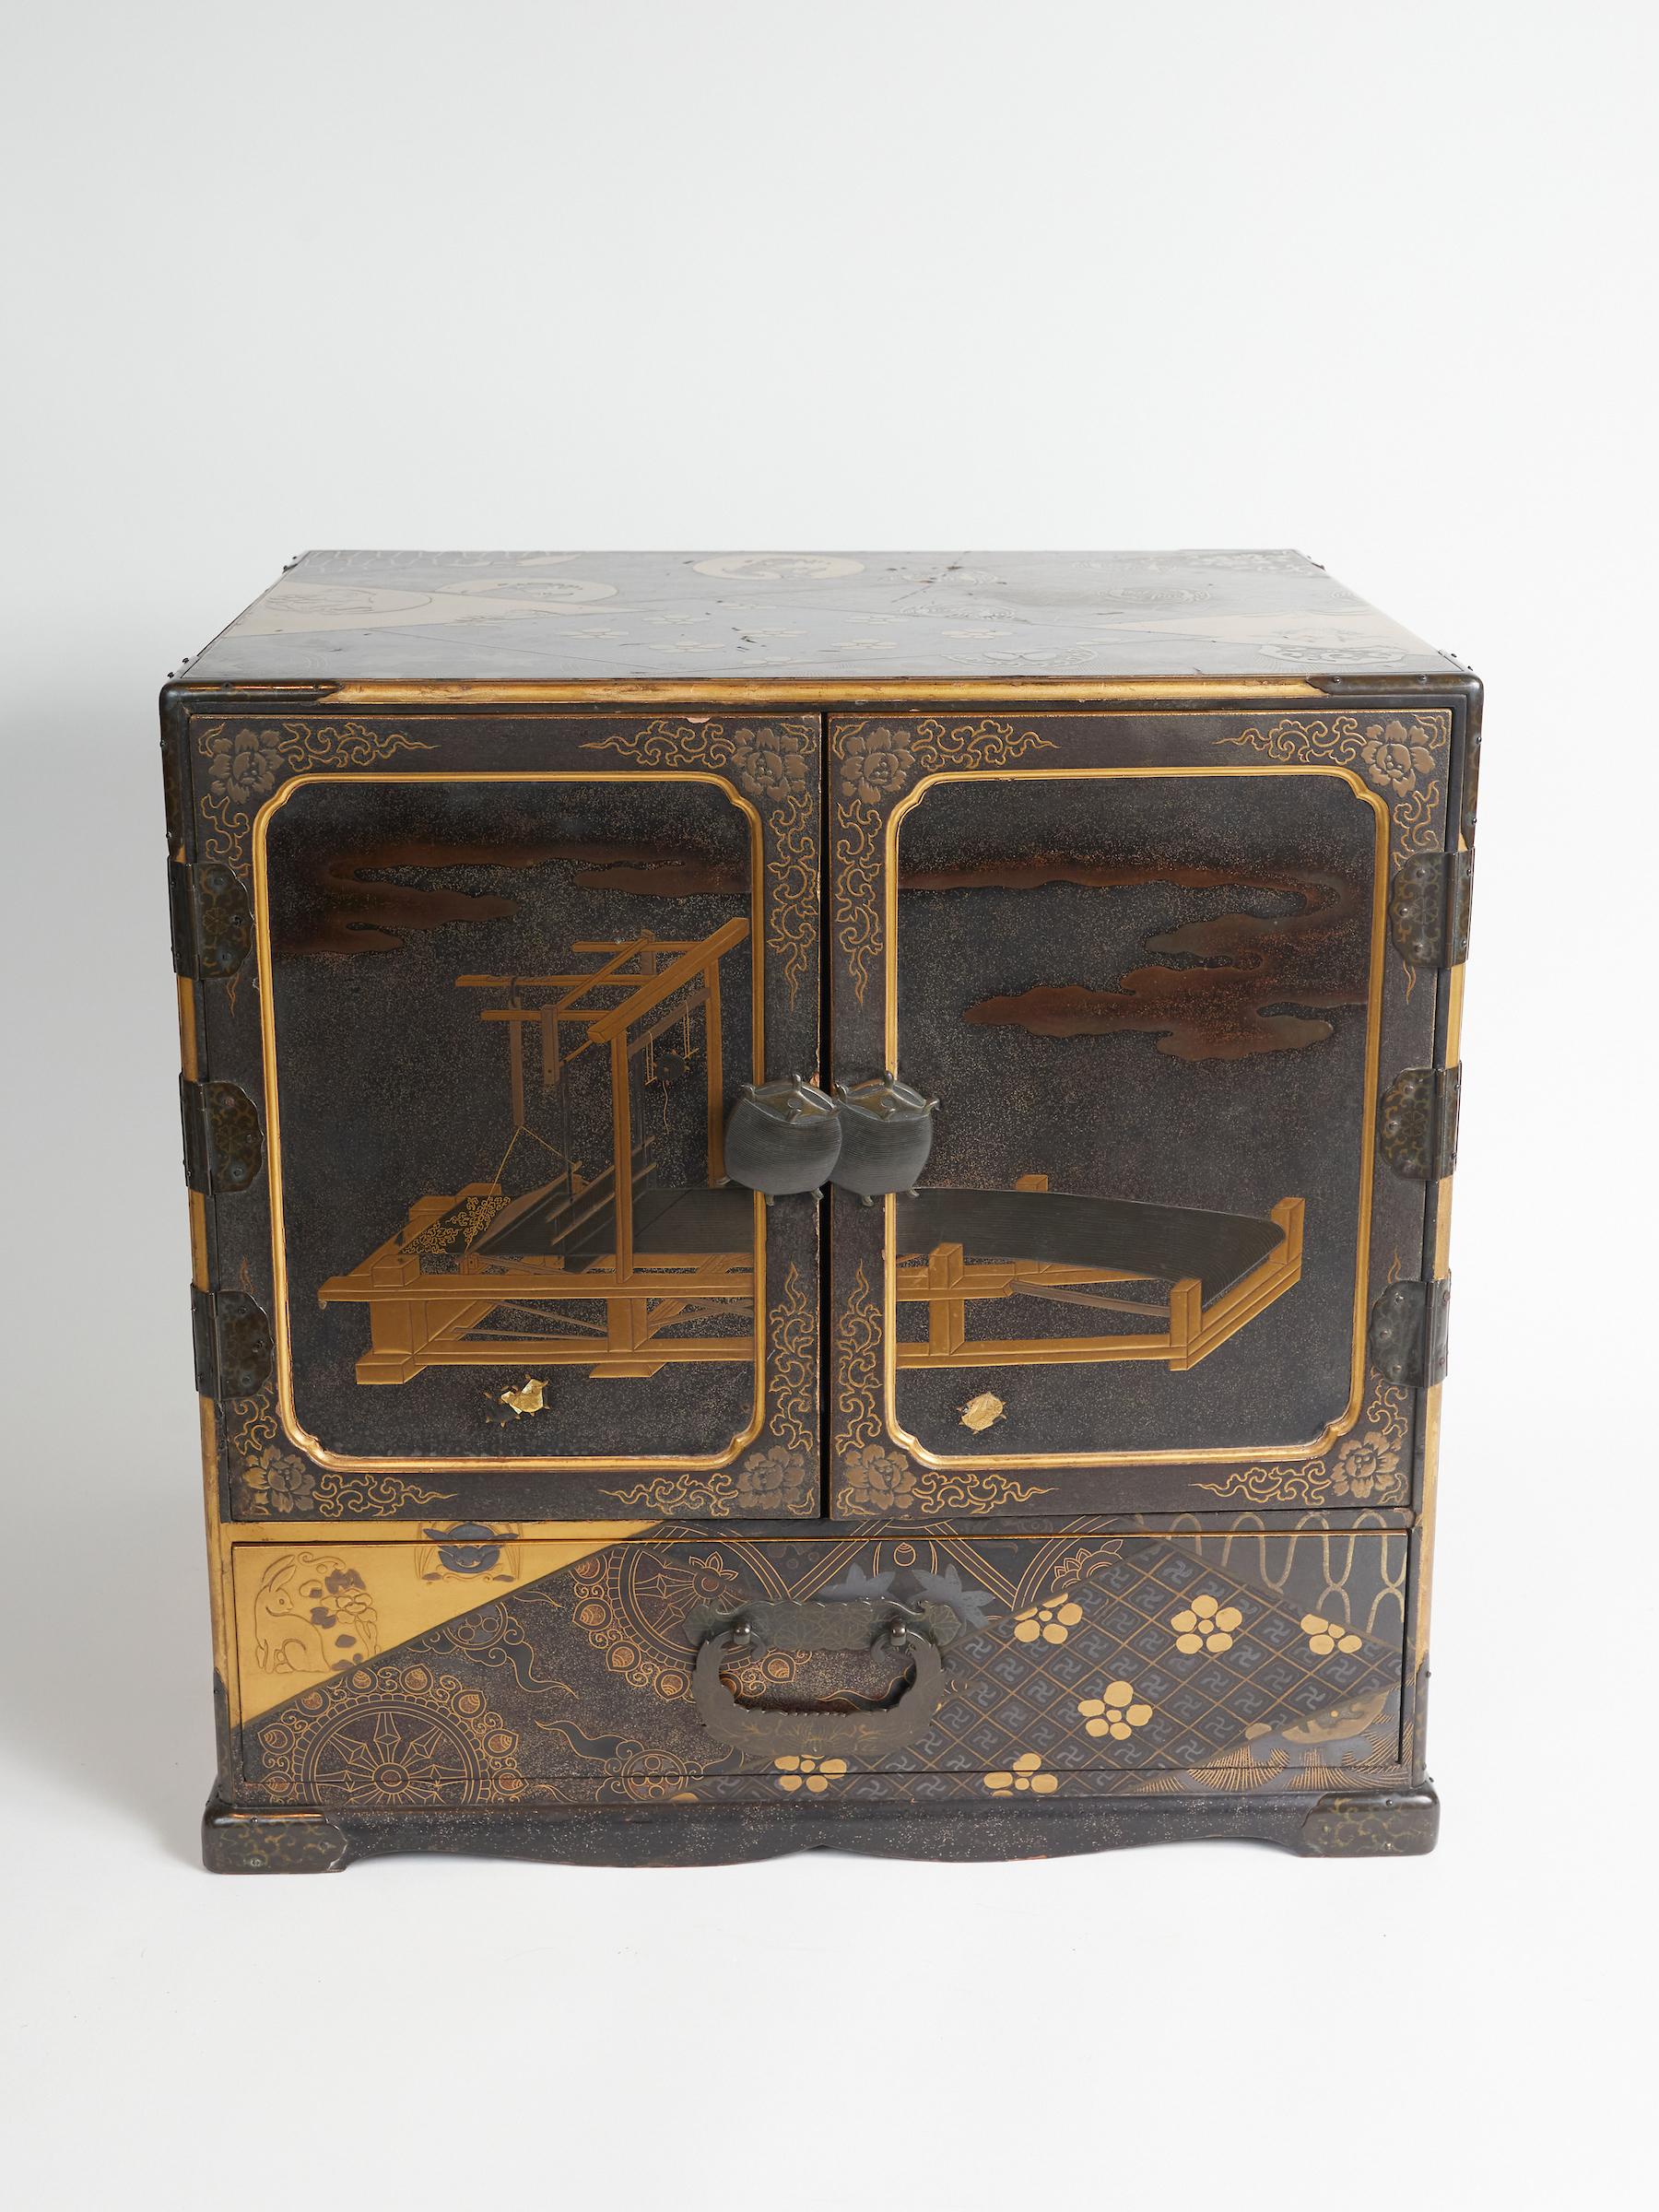 Japanese lacquered Meiji Period cabinet.